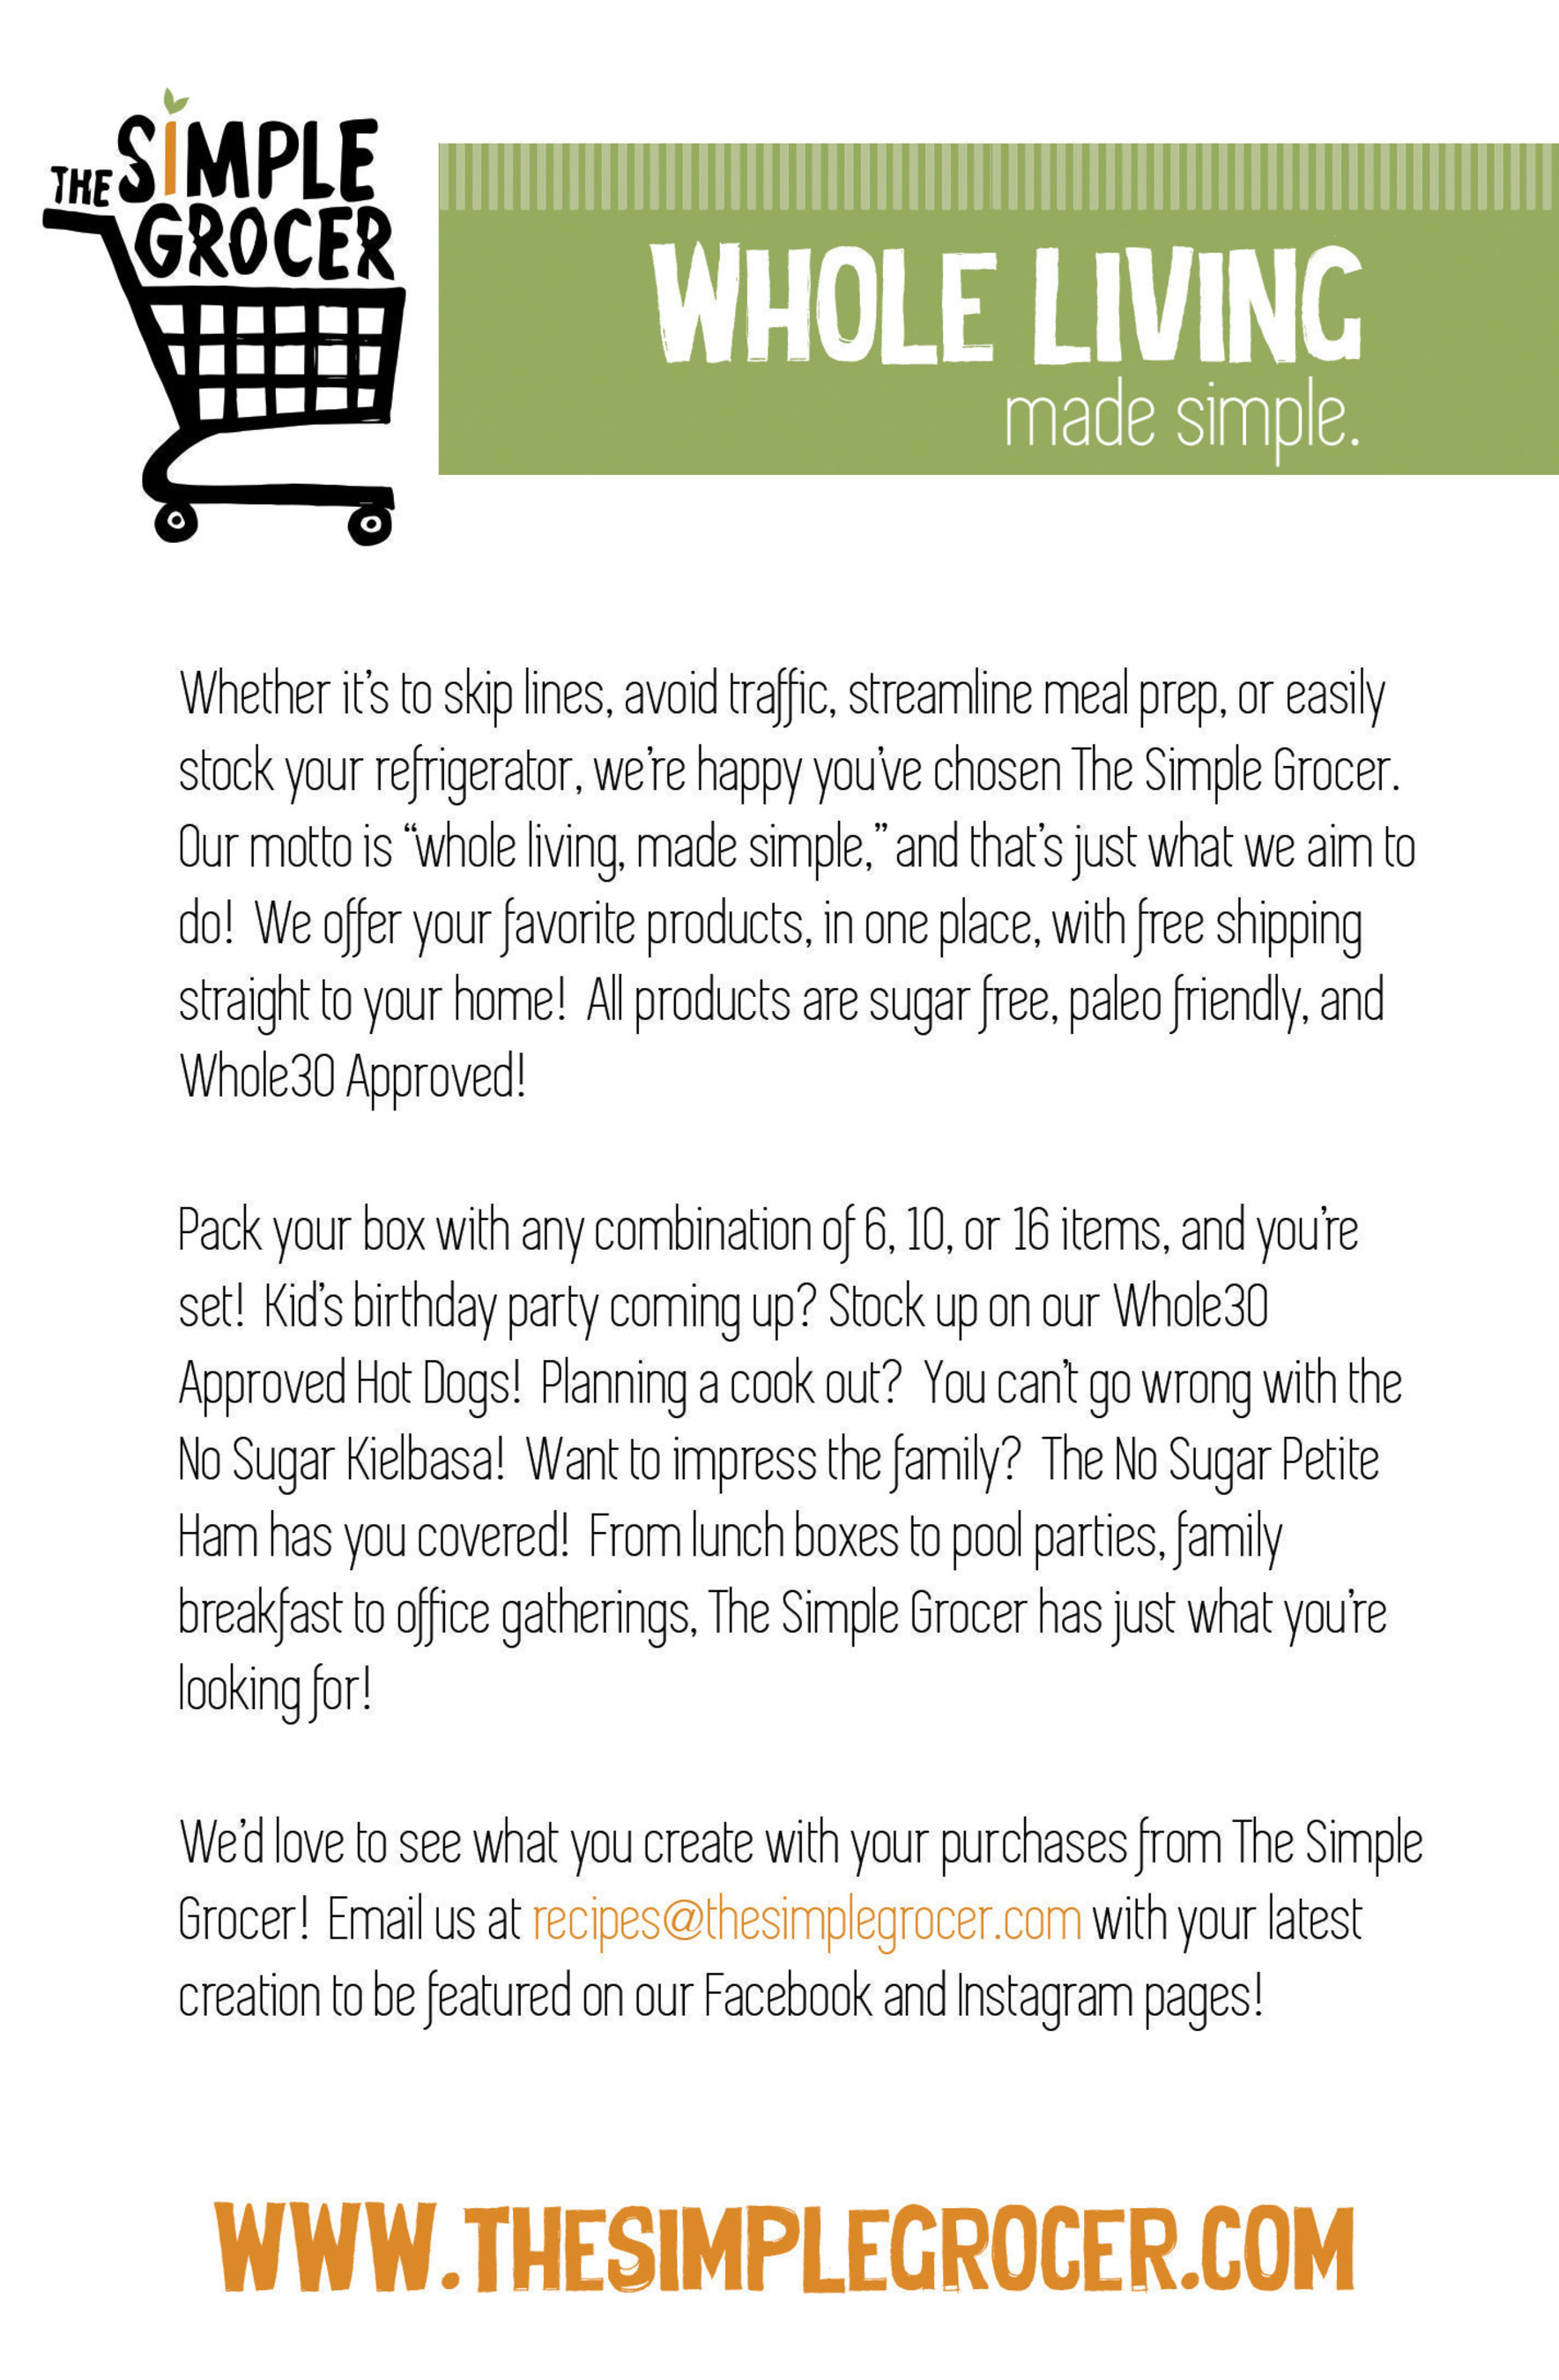 Read a bit more about The Simple Grocer!  Your online source for Whole30 approved, Paleo friendly Meats!